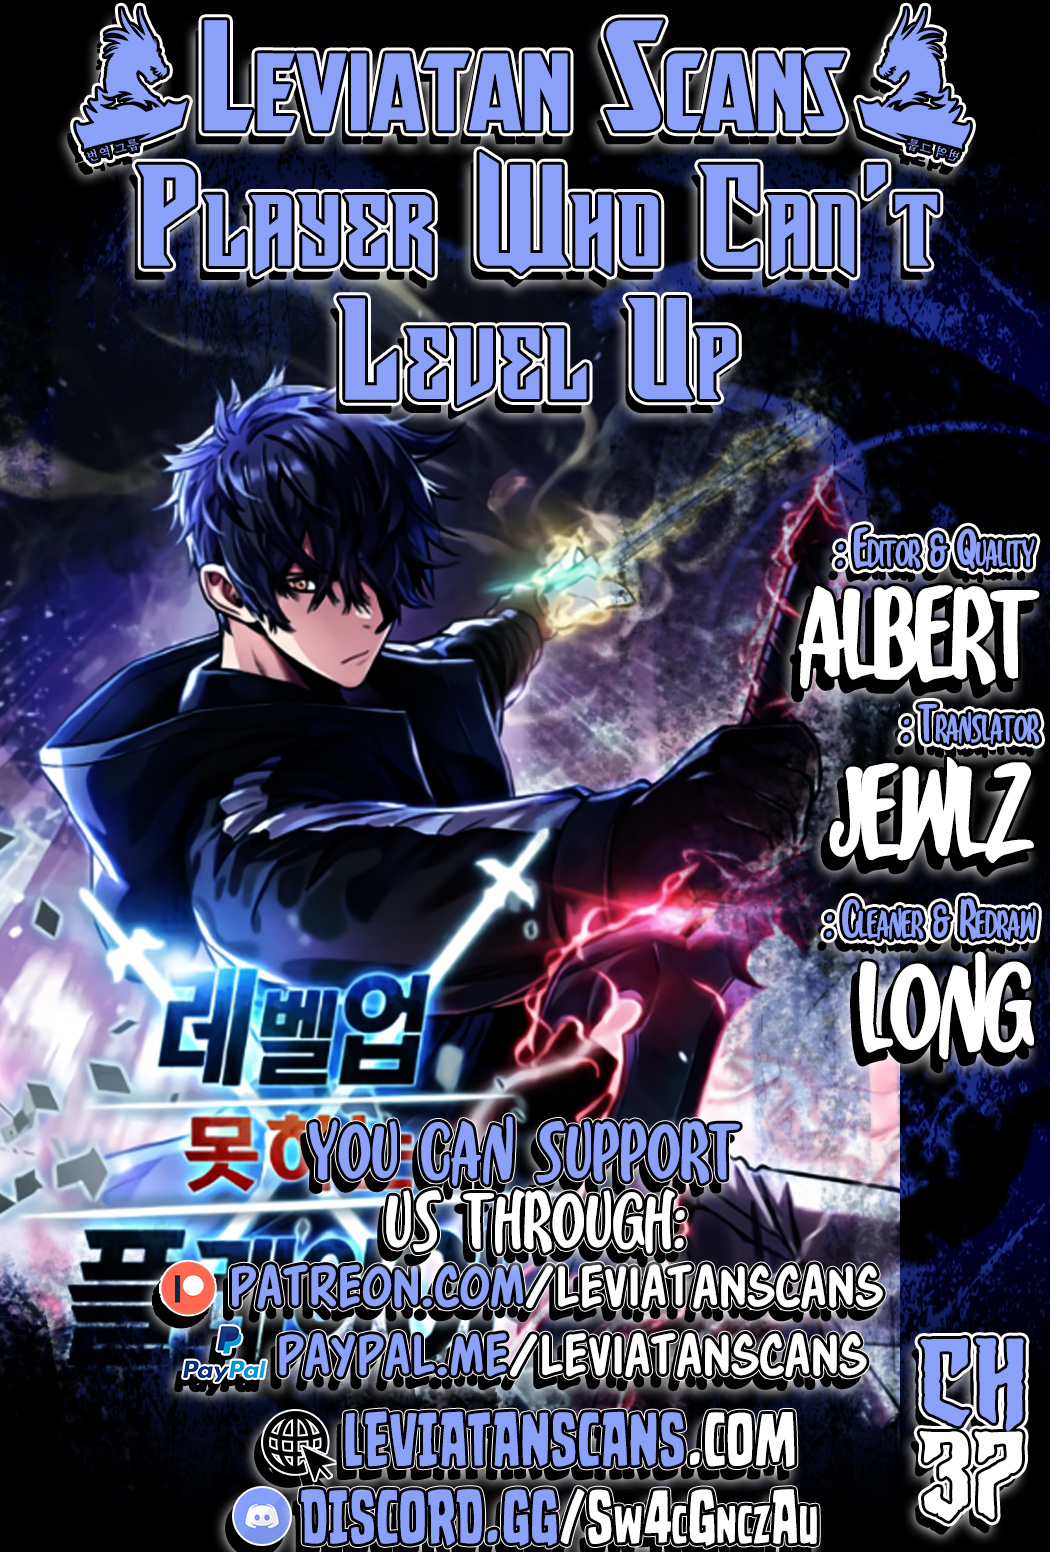 The Player That Can't Level Up - Chapter 7046 - Image 1